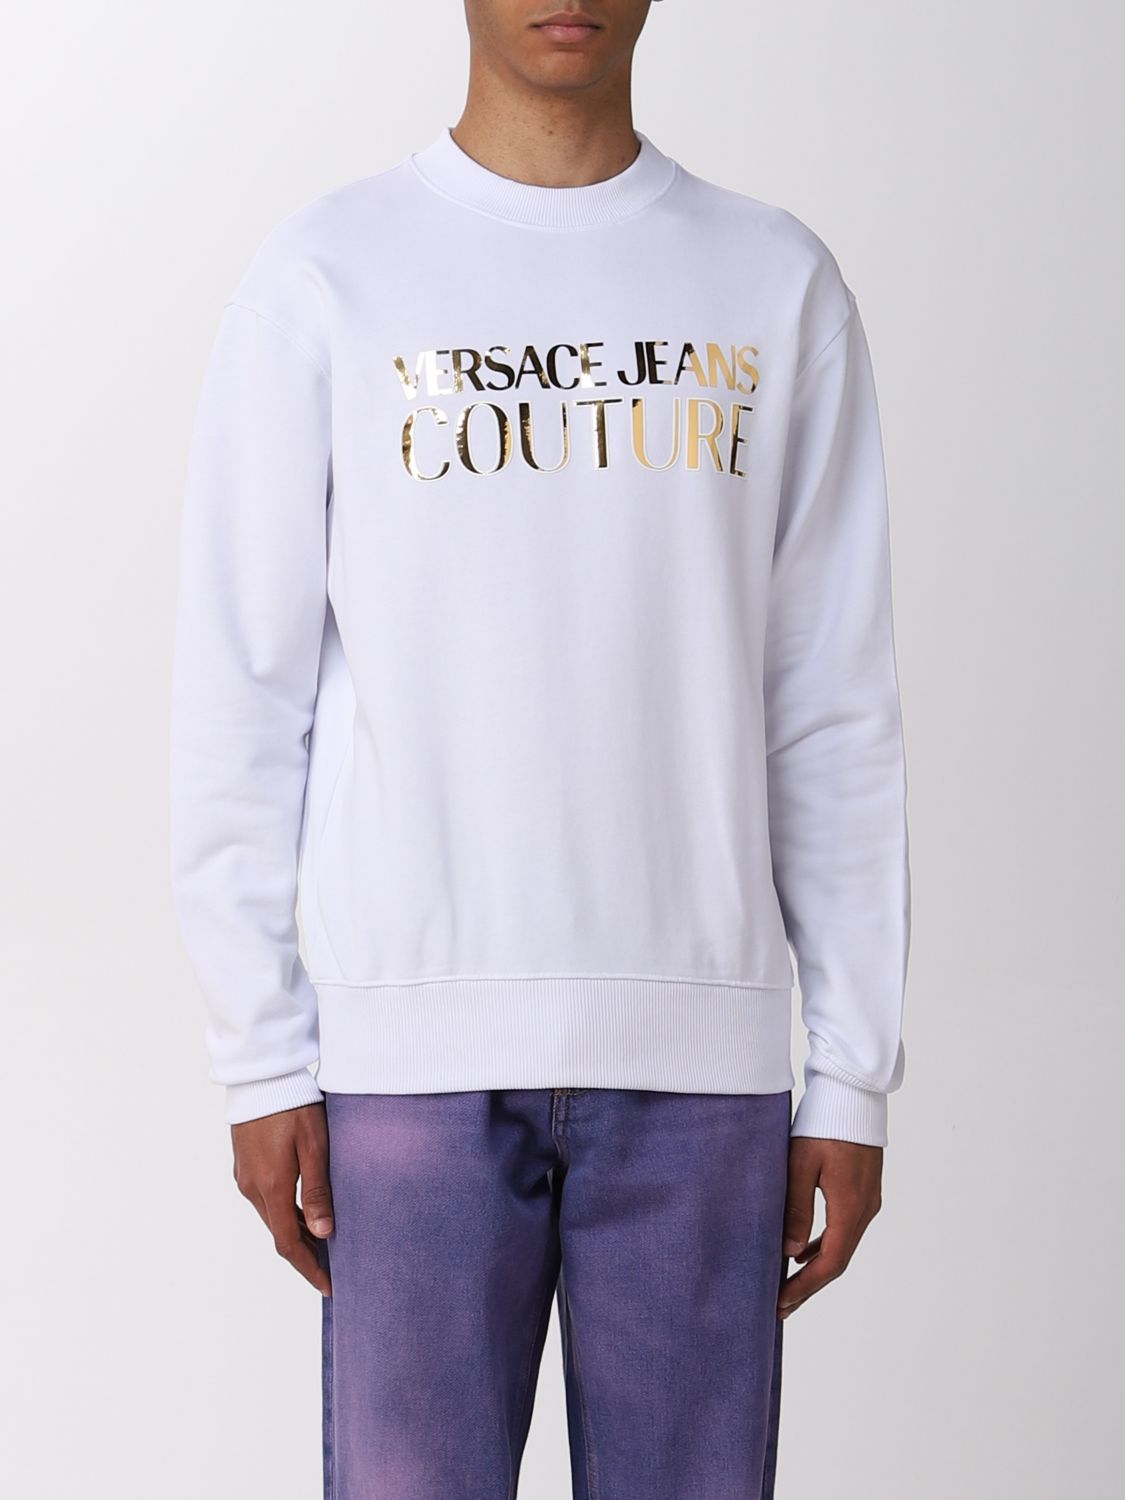 Versace Jeans Couture Sweatshirt In Cotton Blend In White